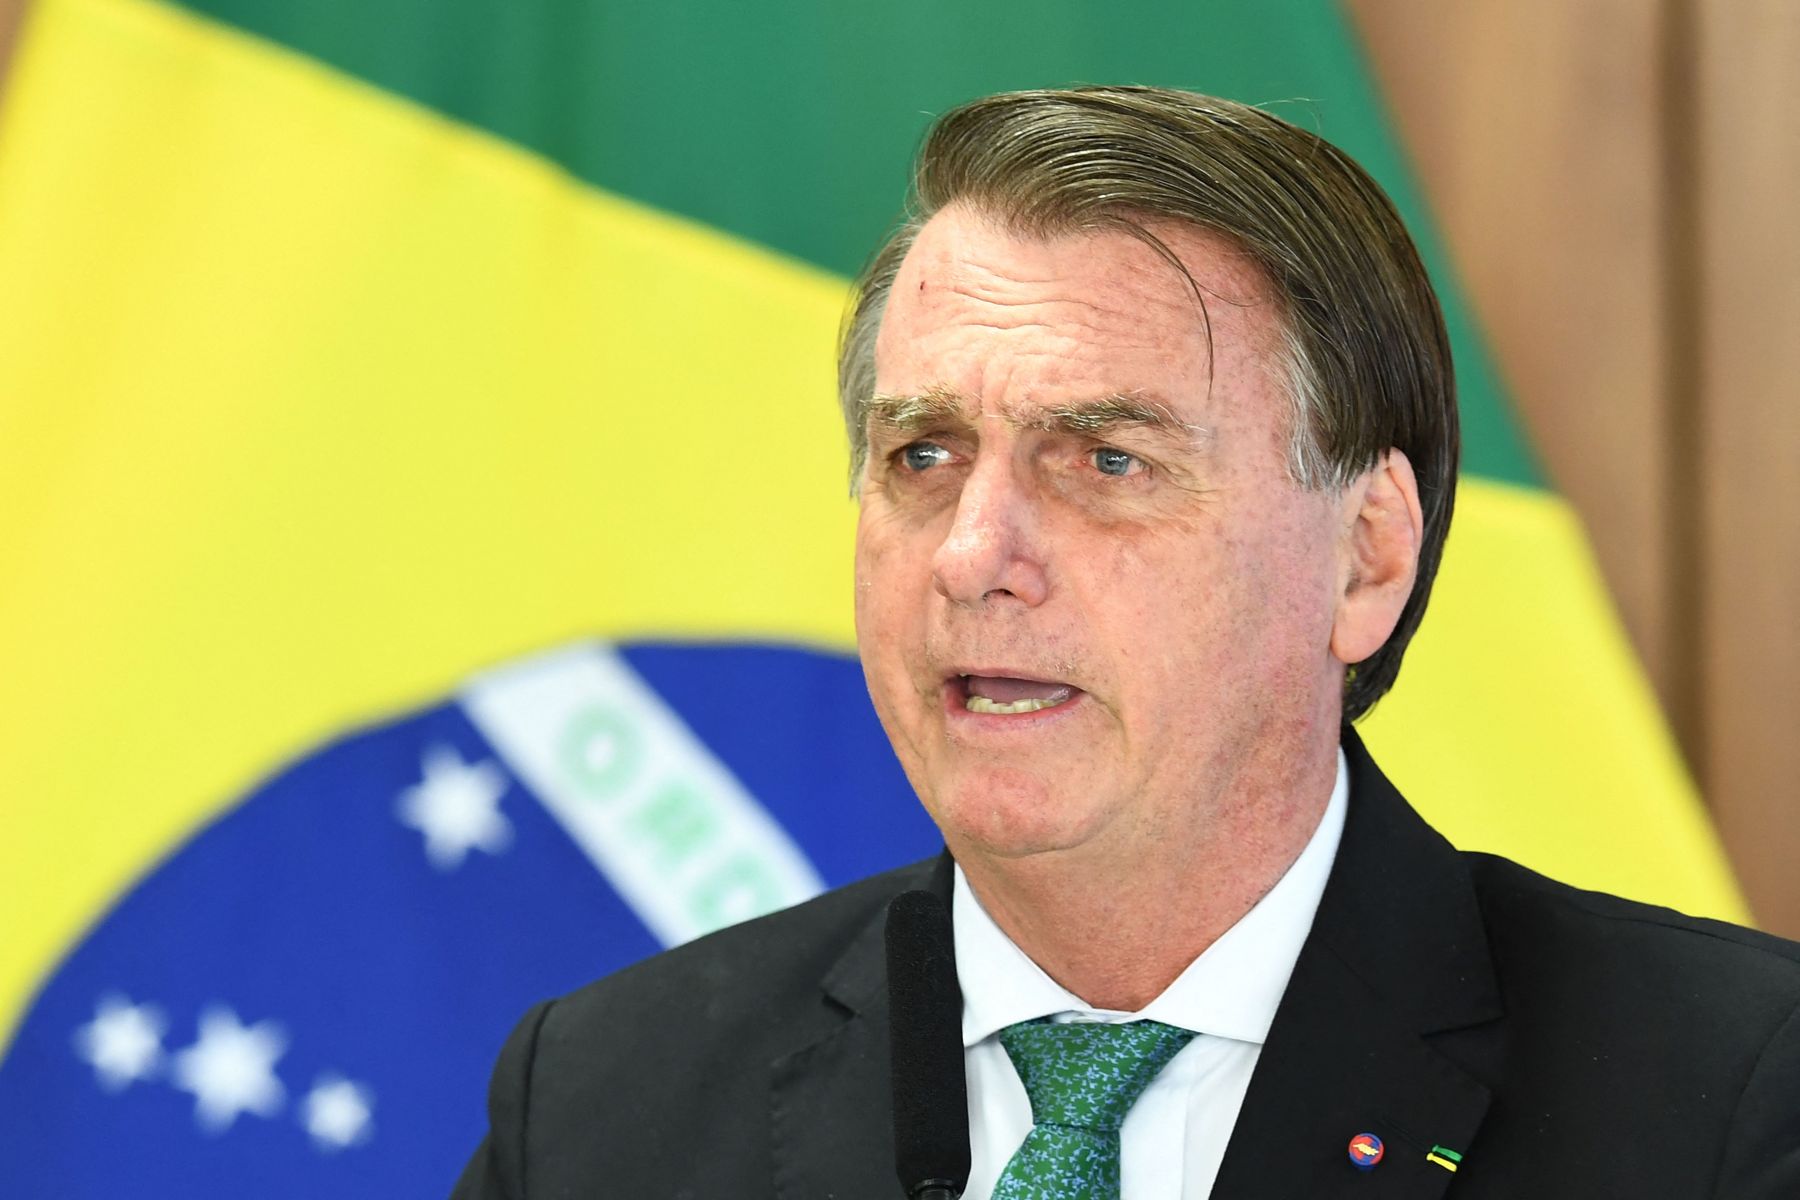 Brazilian President Jair Bolsonaro said the country “cannot withstand” another lockdown amid fears over the Omicron variant.